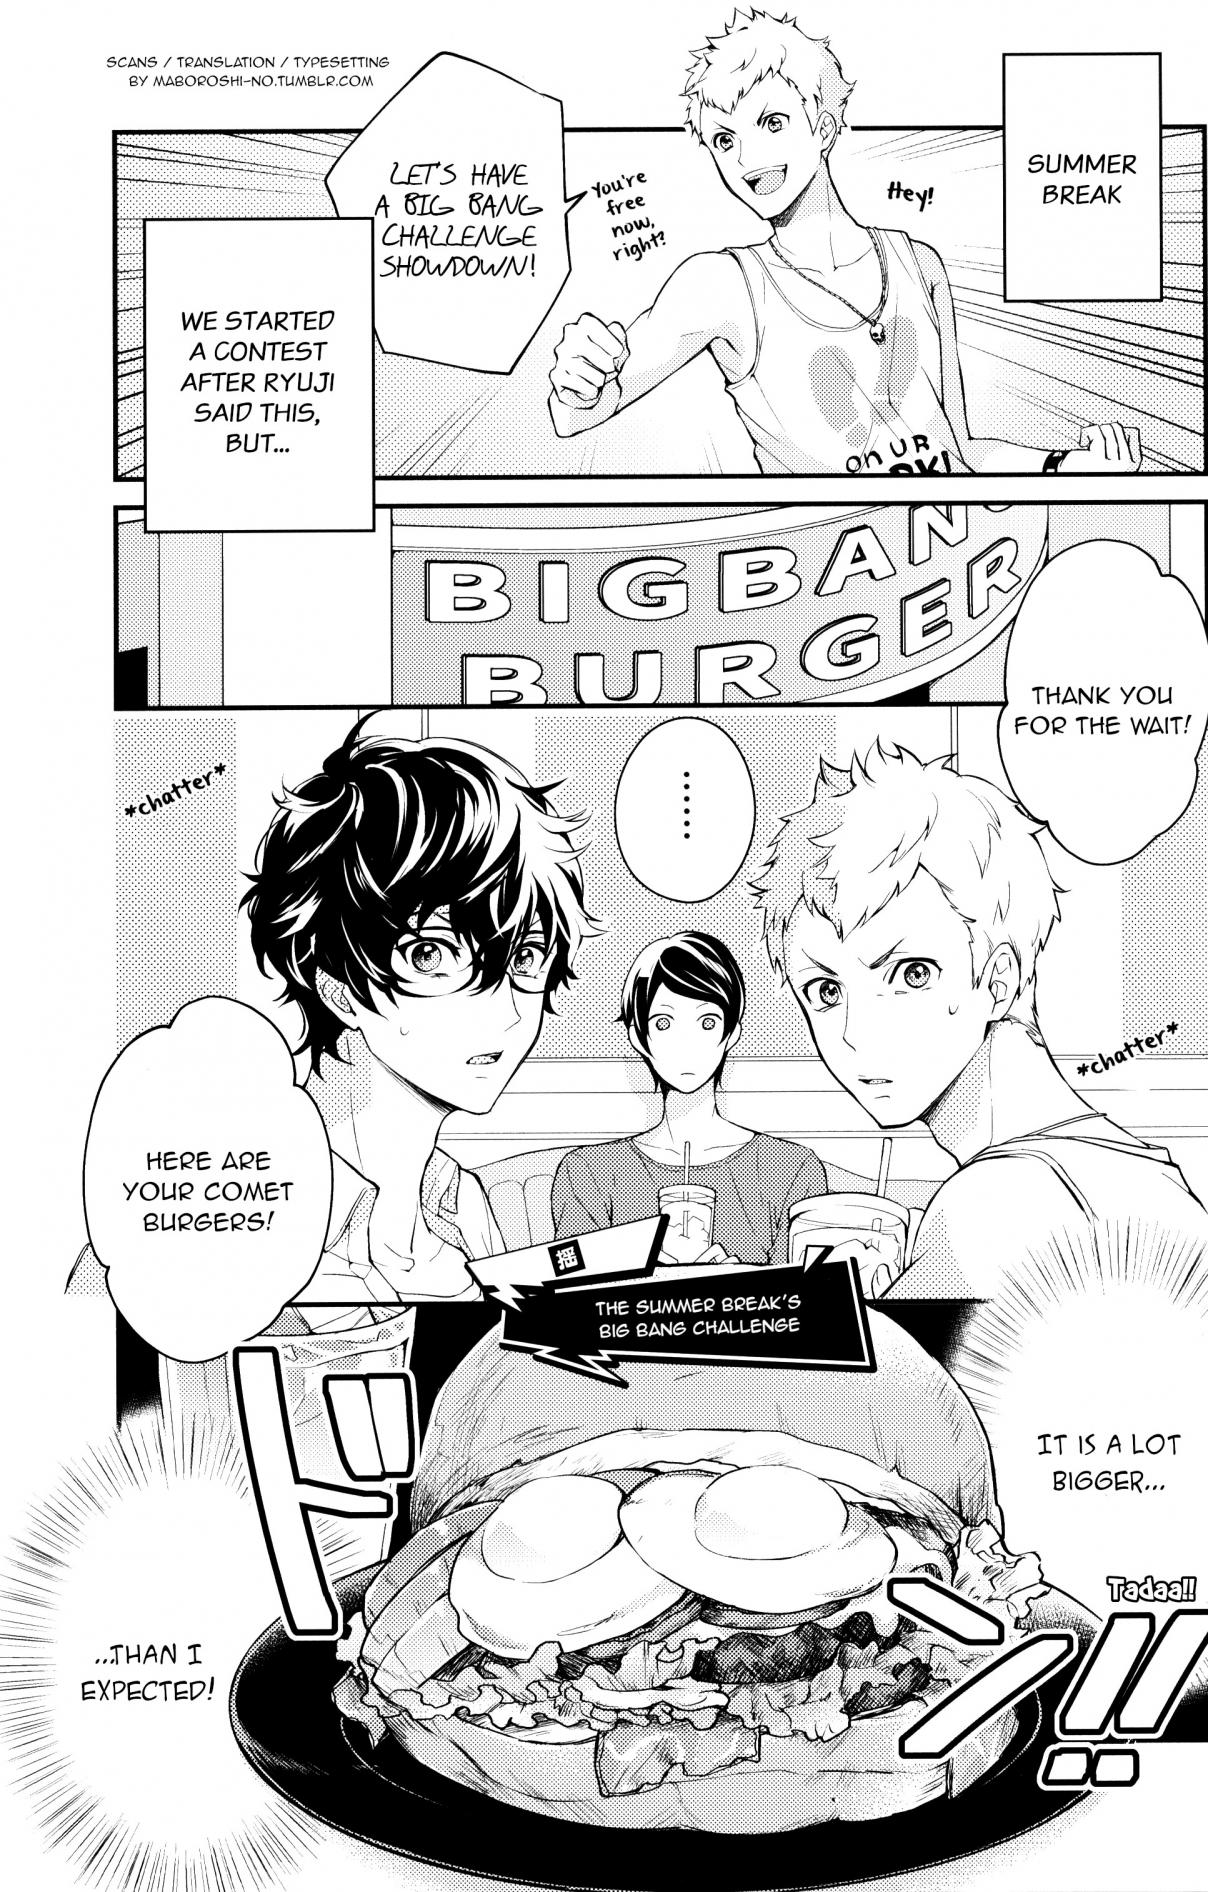 Persona 5 Character Anthology Ch. 5 The summer break's Big Bang Challenge